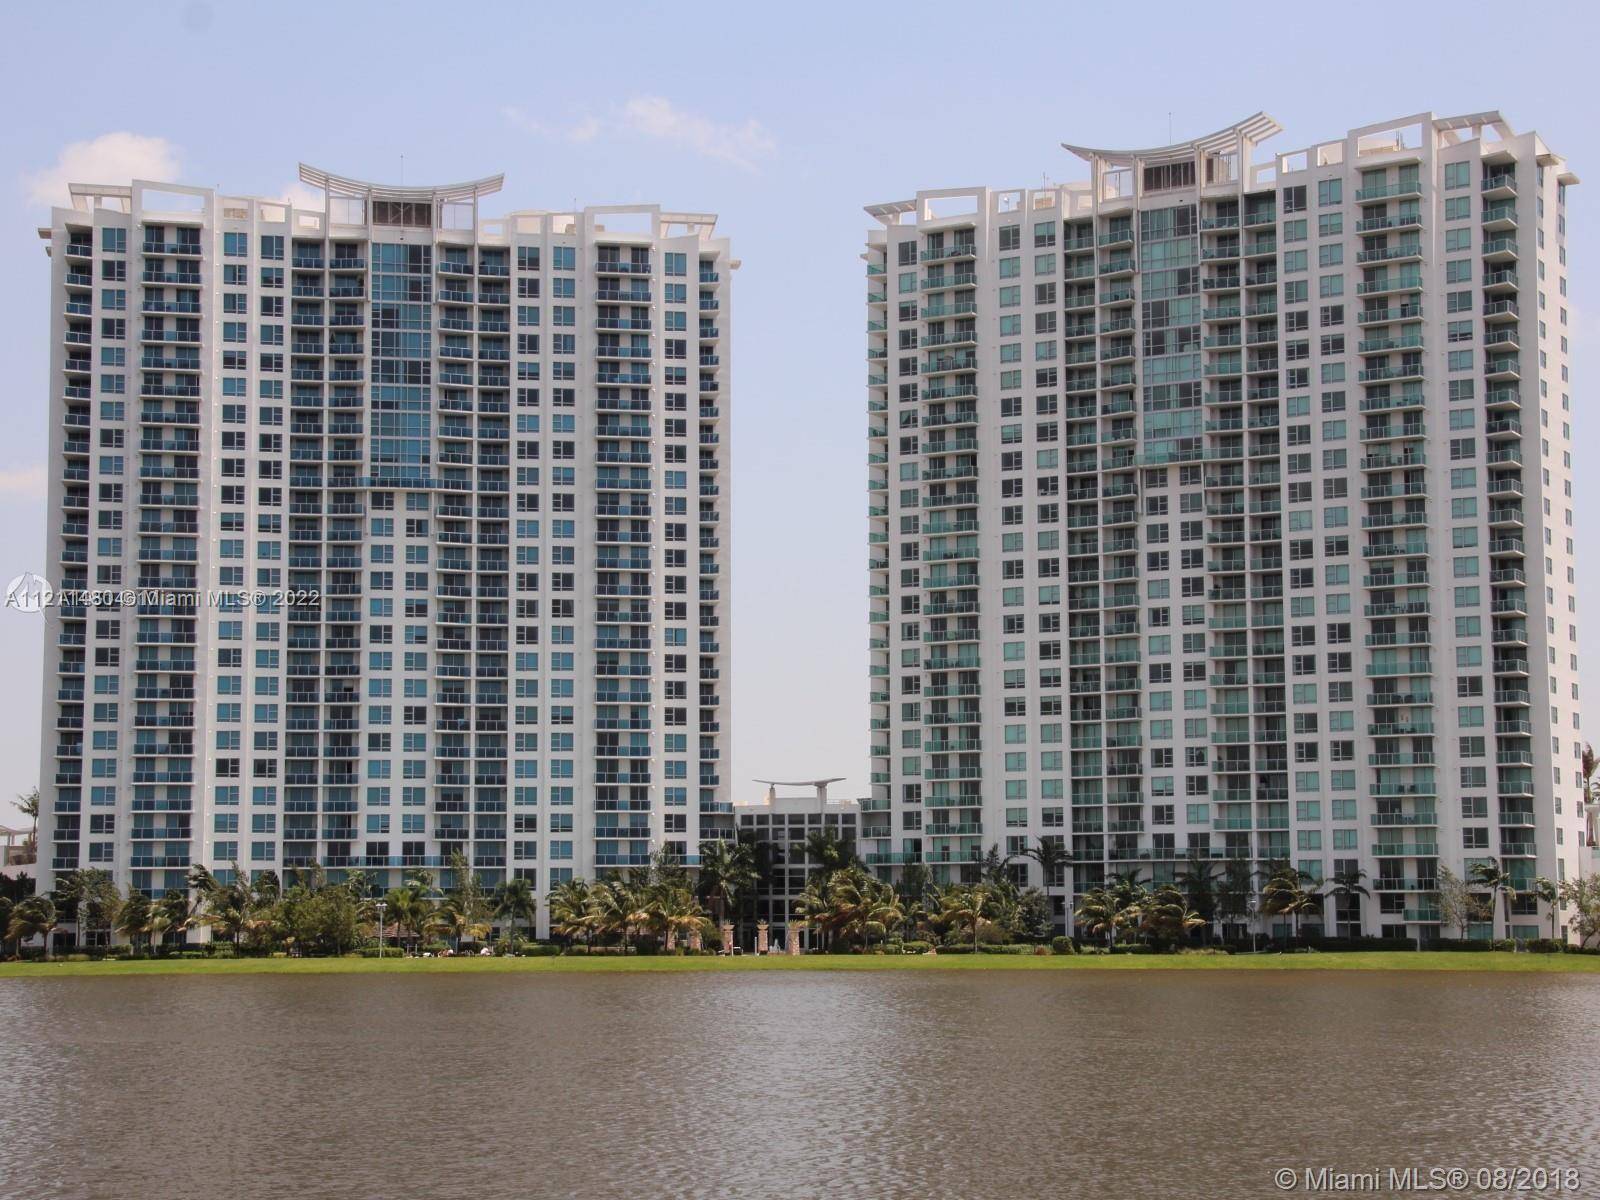 Luxury high rise offer 2 Bed 2 Bath, with spectacular lake, pool, everglades view.